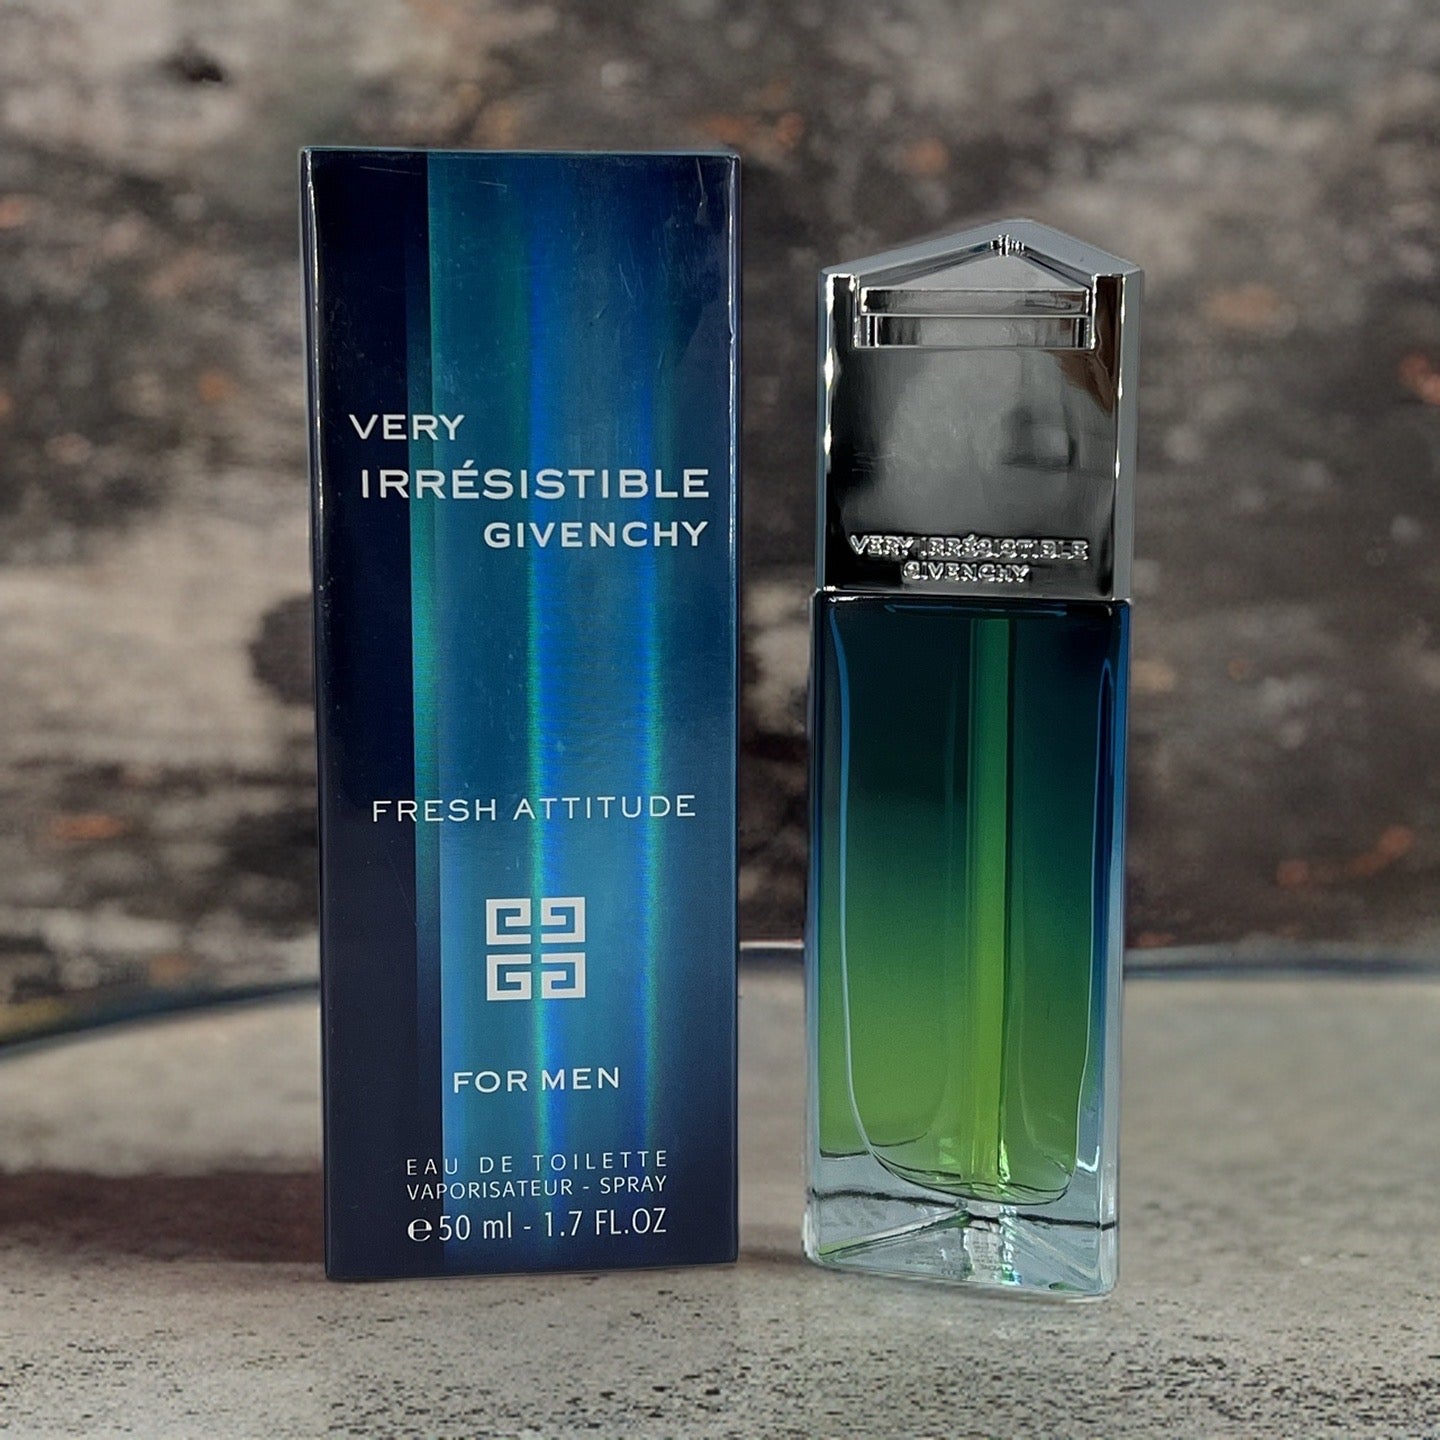 Very Irresistible Fresh Attitude by Givenchy for Men EDT Spray 1.7 